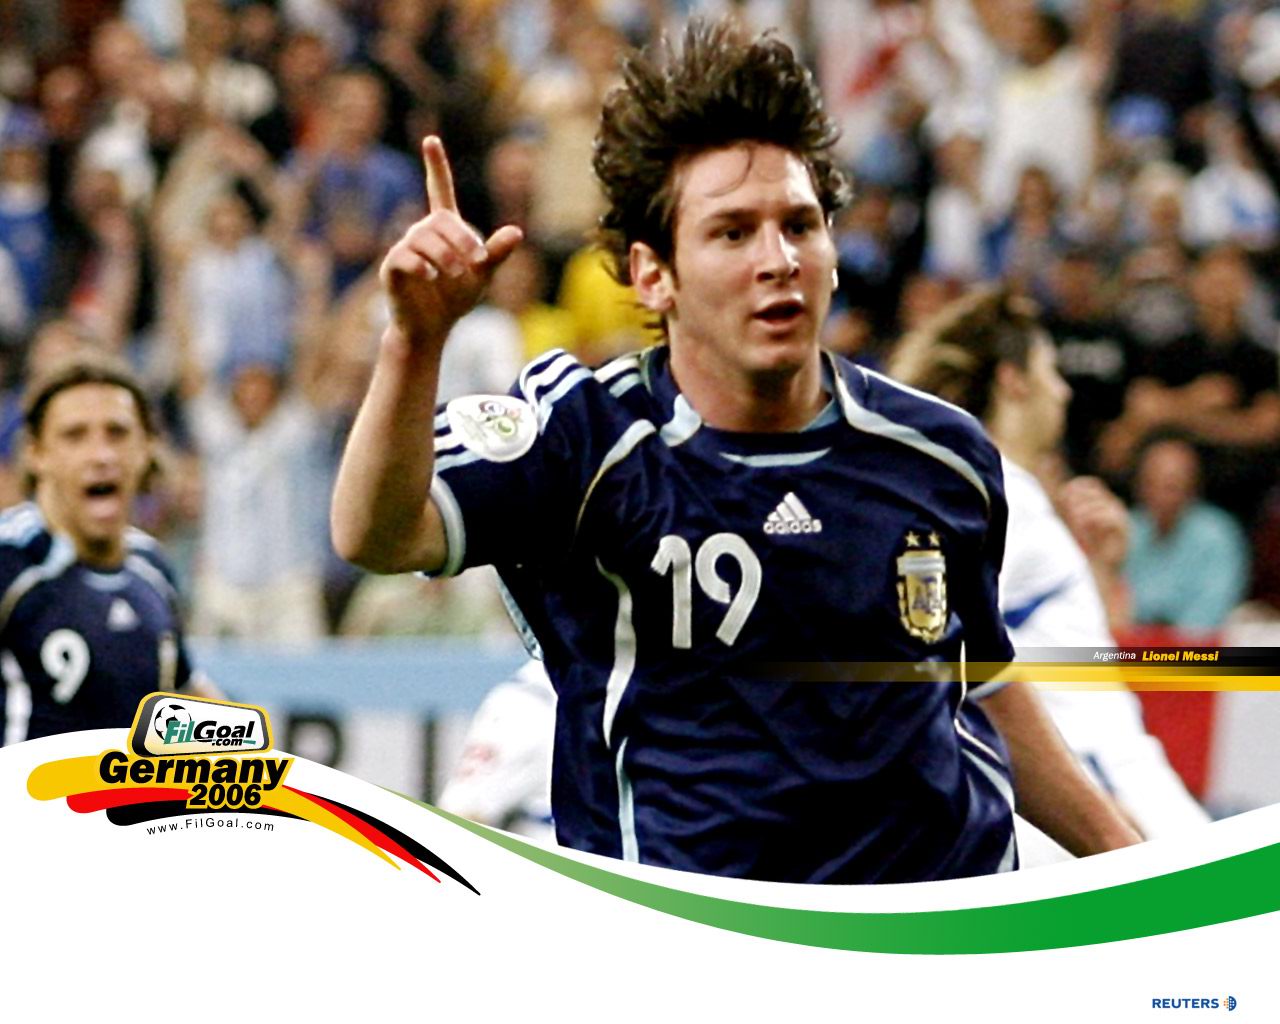 Lionel Messi - Lionel Andres Messi Wallpaper (295454) - Fanpop - Page 91